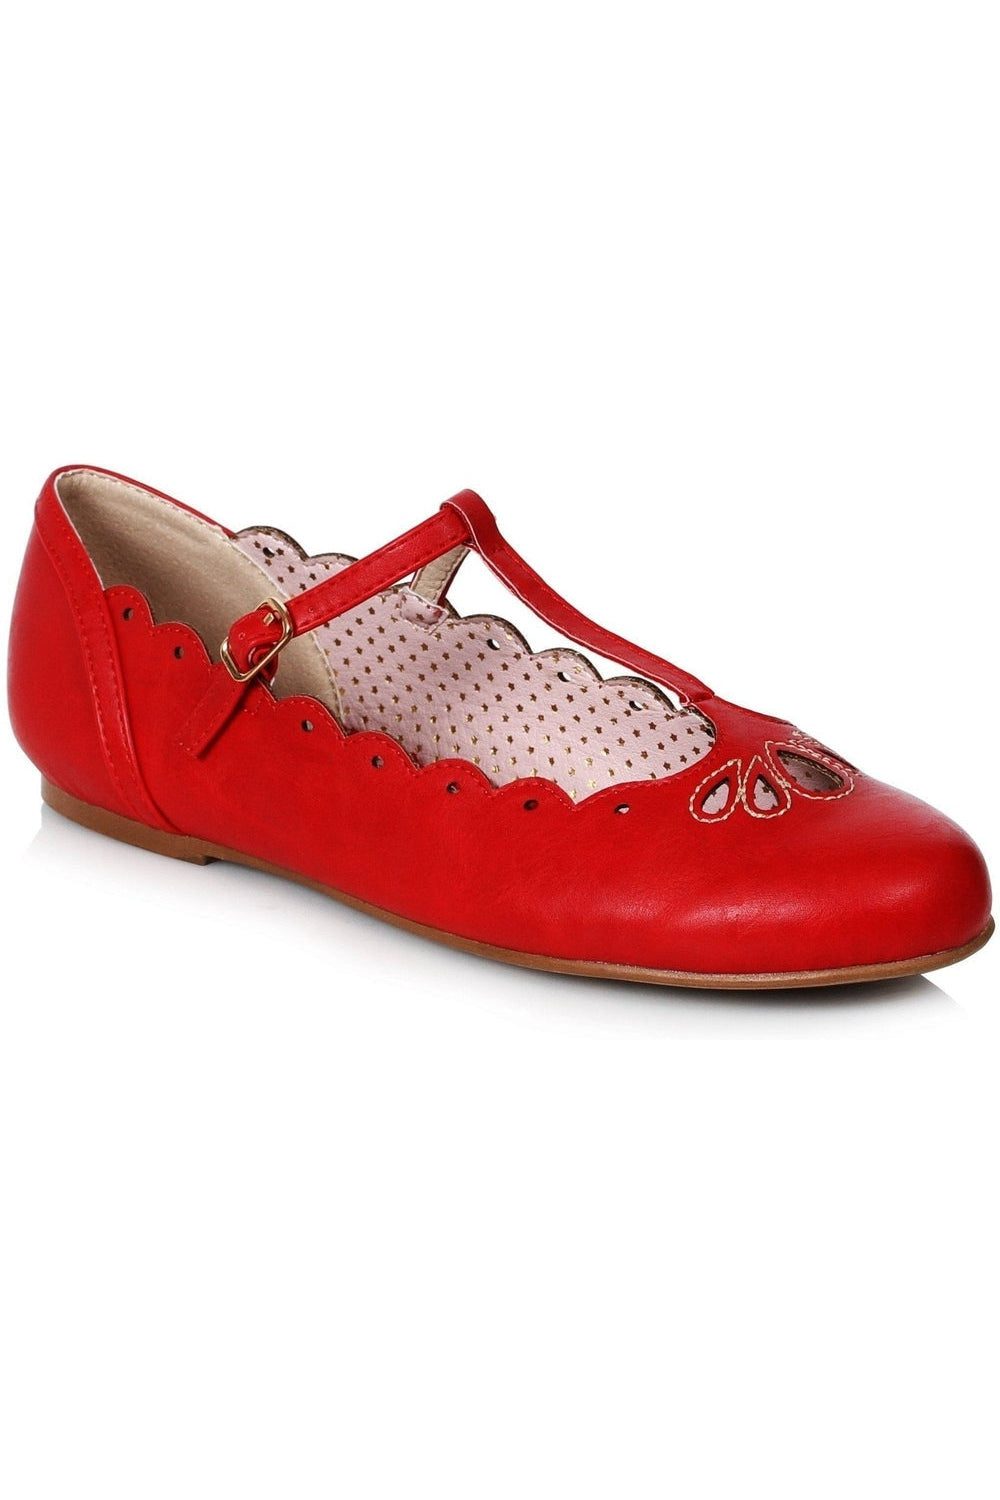 Bettie Paige Maila Vintage Flat | Red Faux Leather-Bettie Page by Ellie-SEXYSHOES.COM